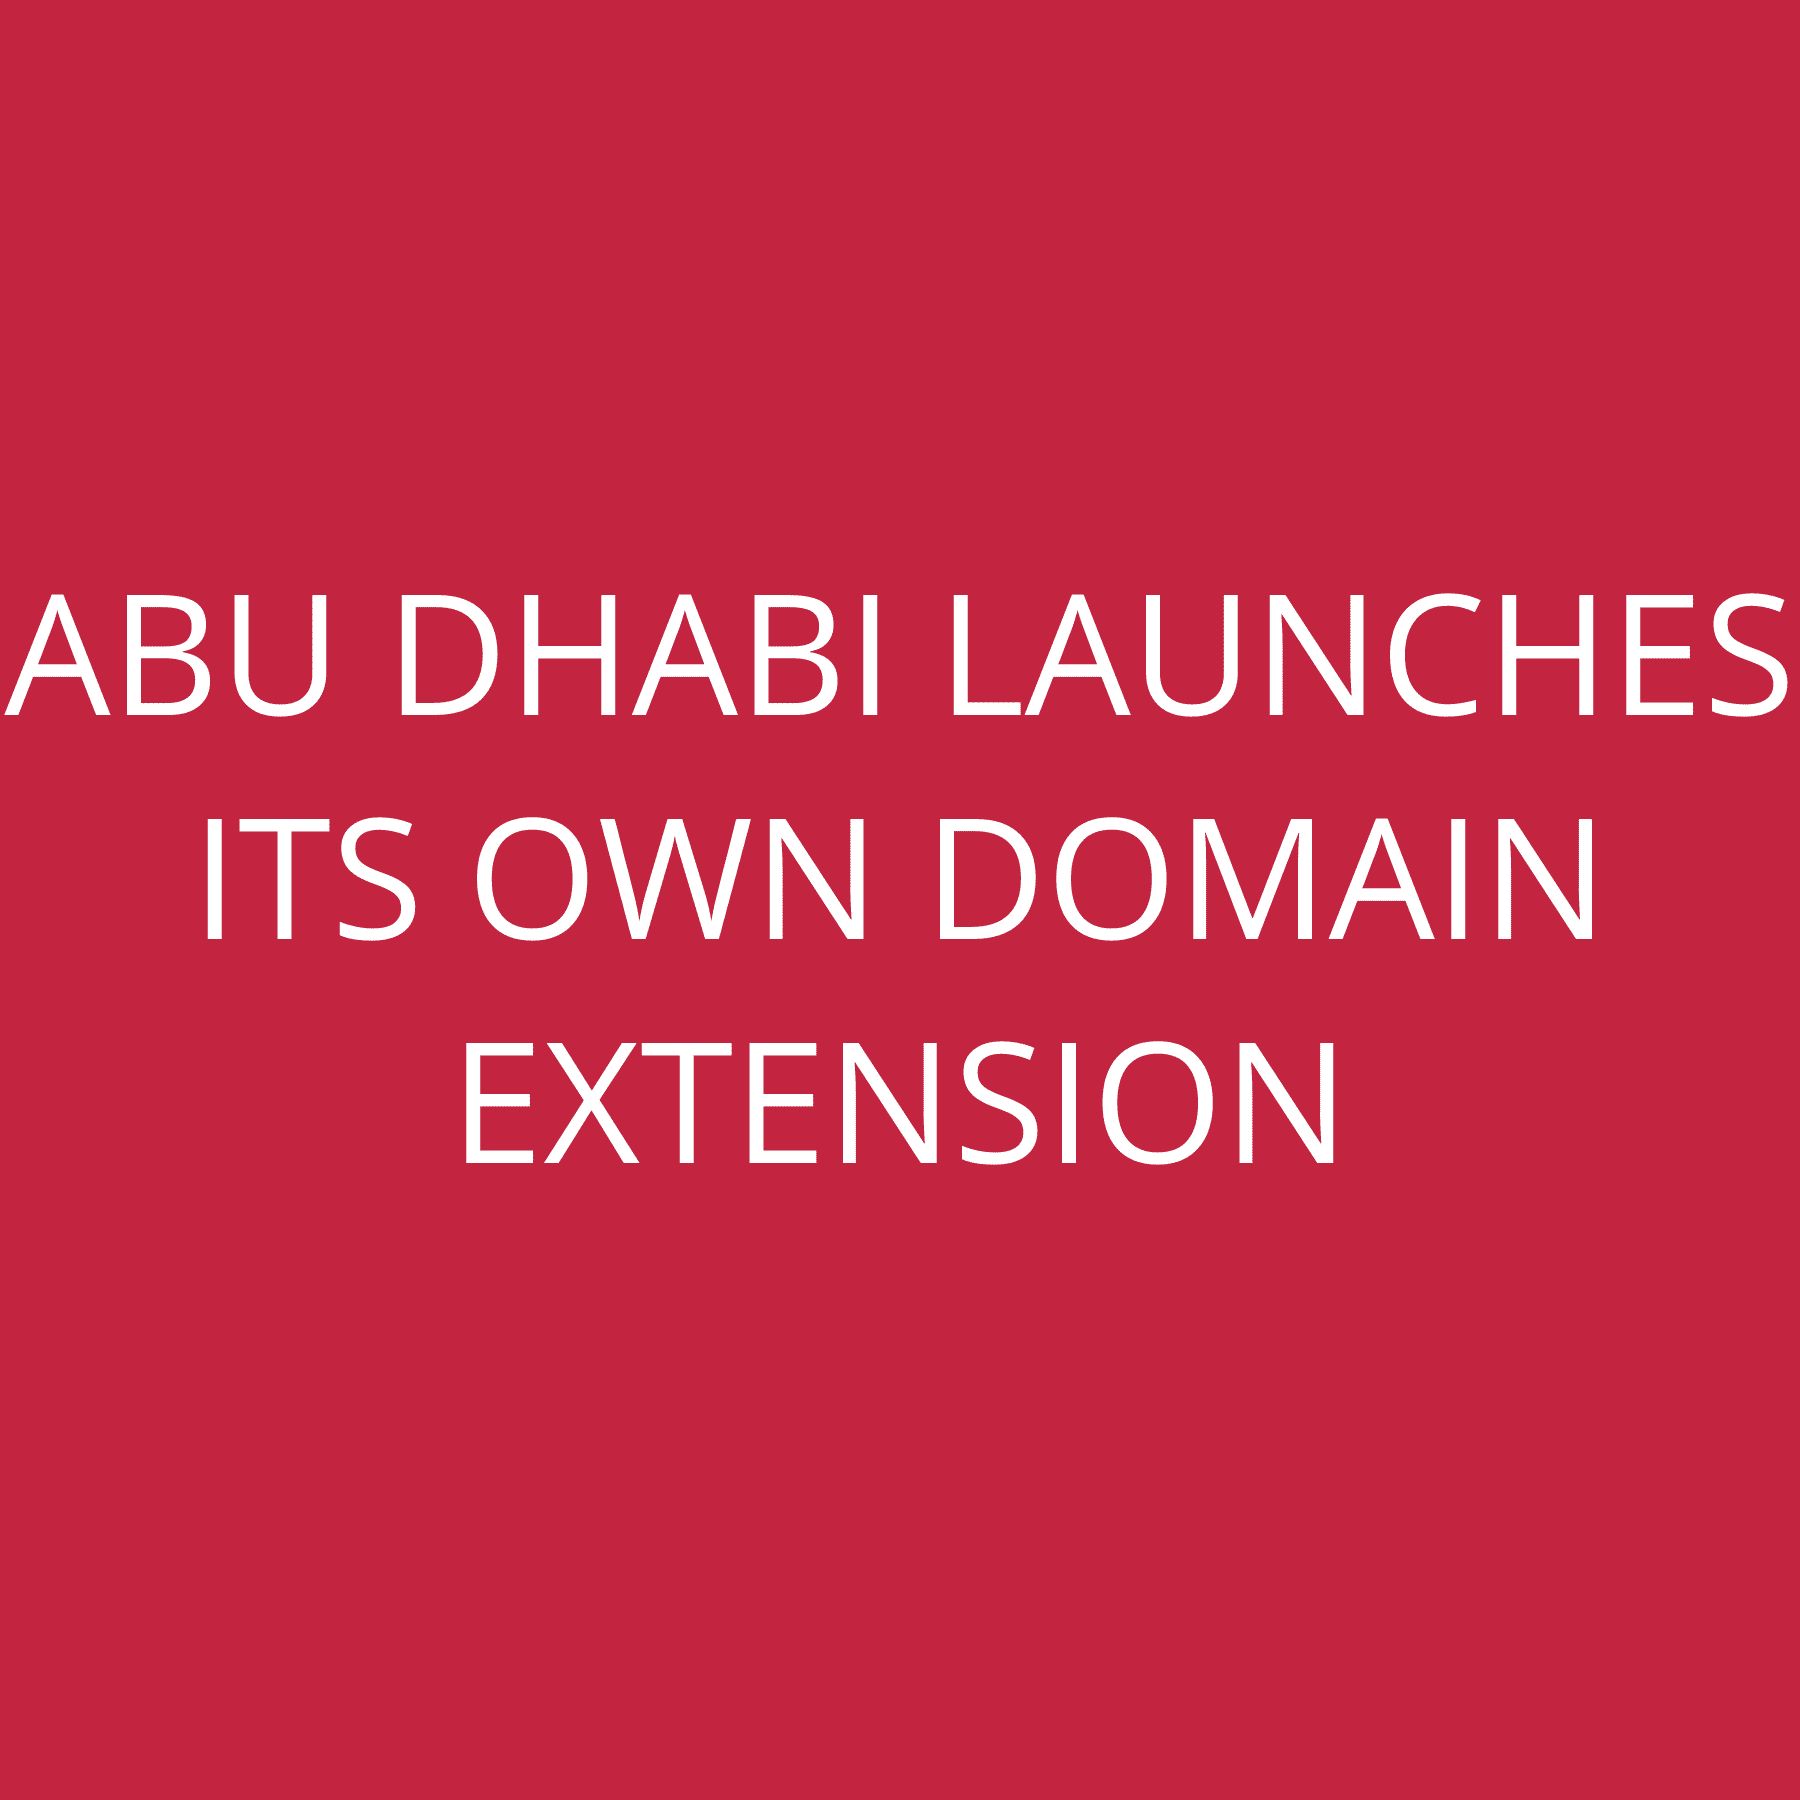 Abu Dhabi launches its own domain extension